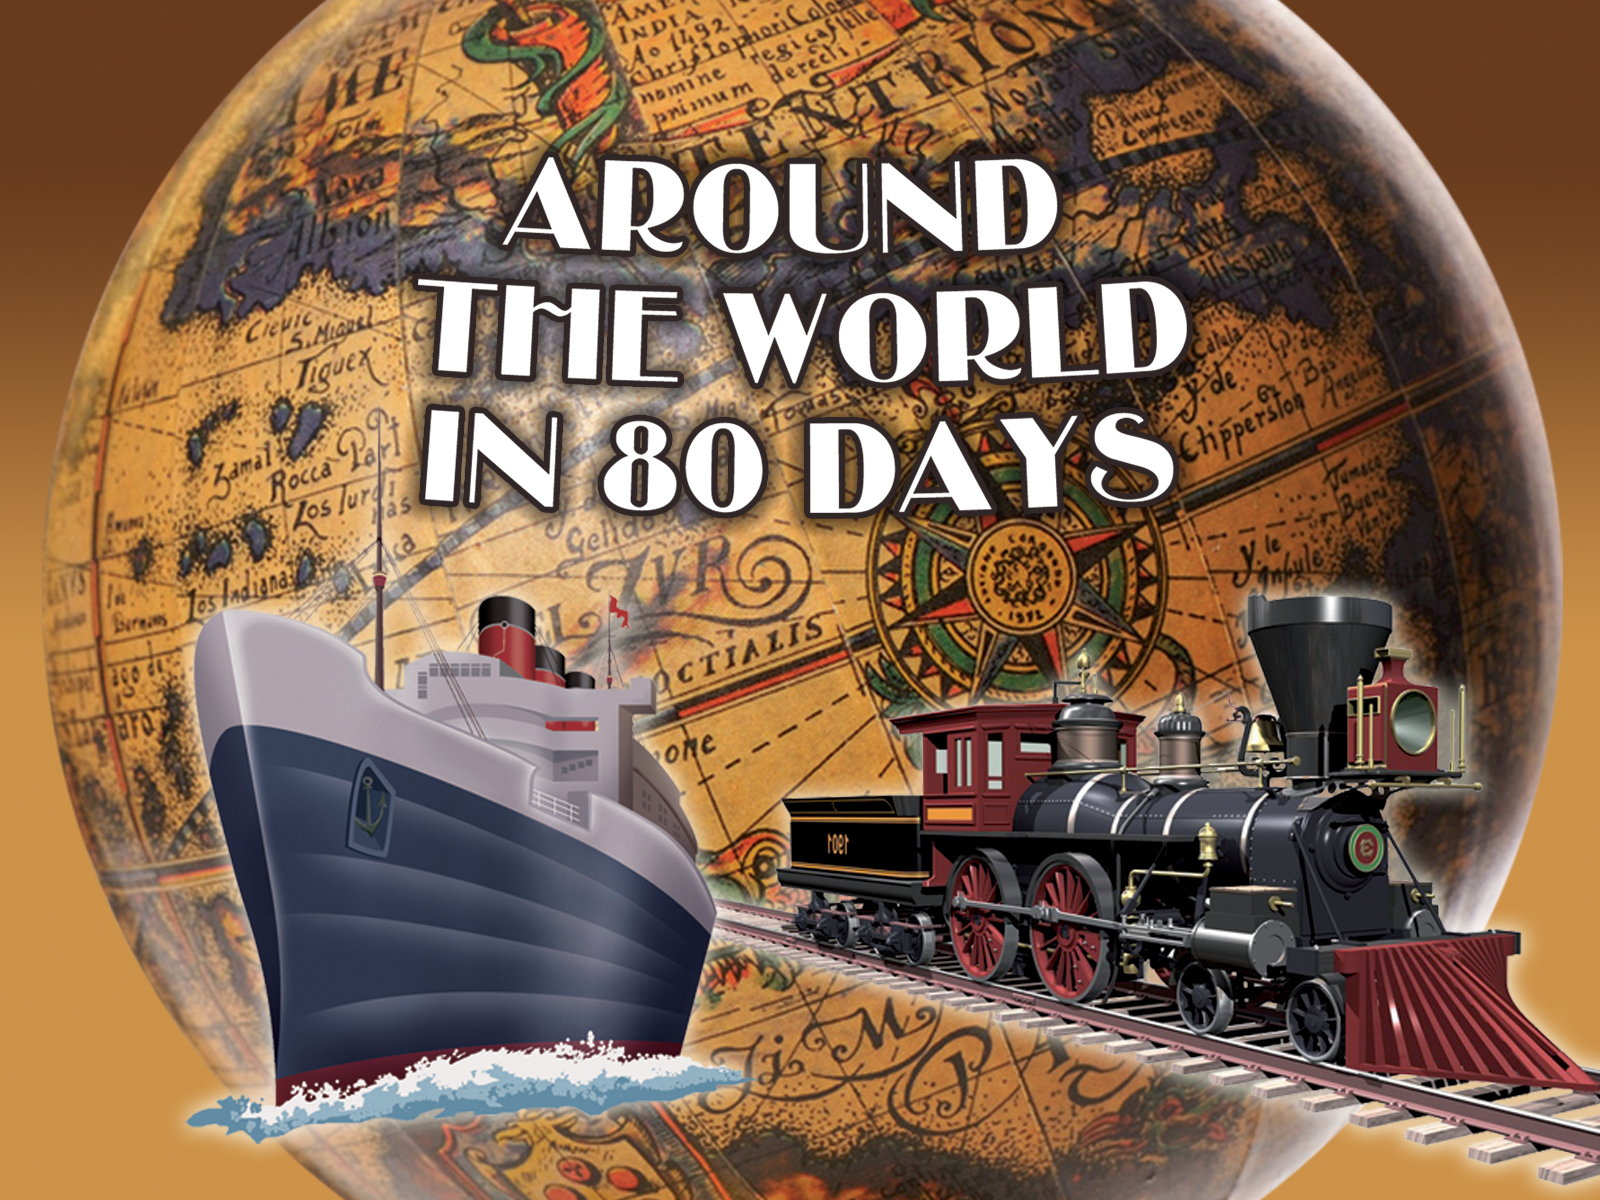 Around The World In 80 Days Backgrounds, Compatible - PC, Mobile, Gadgets| 1600x1200 px